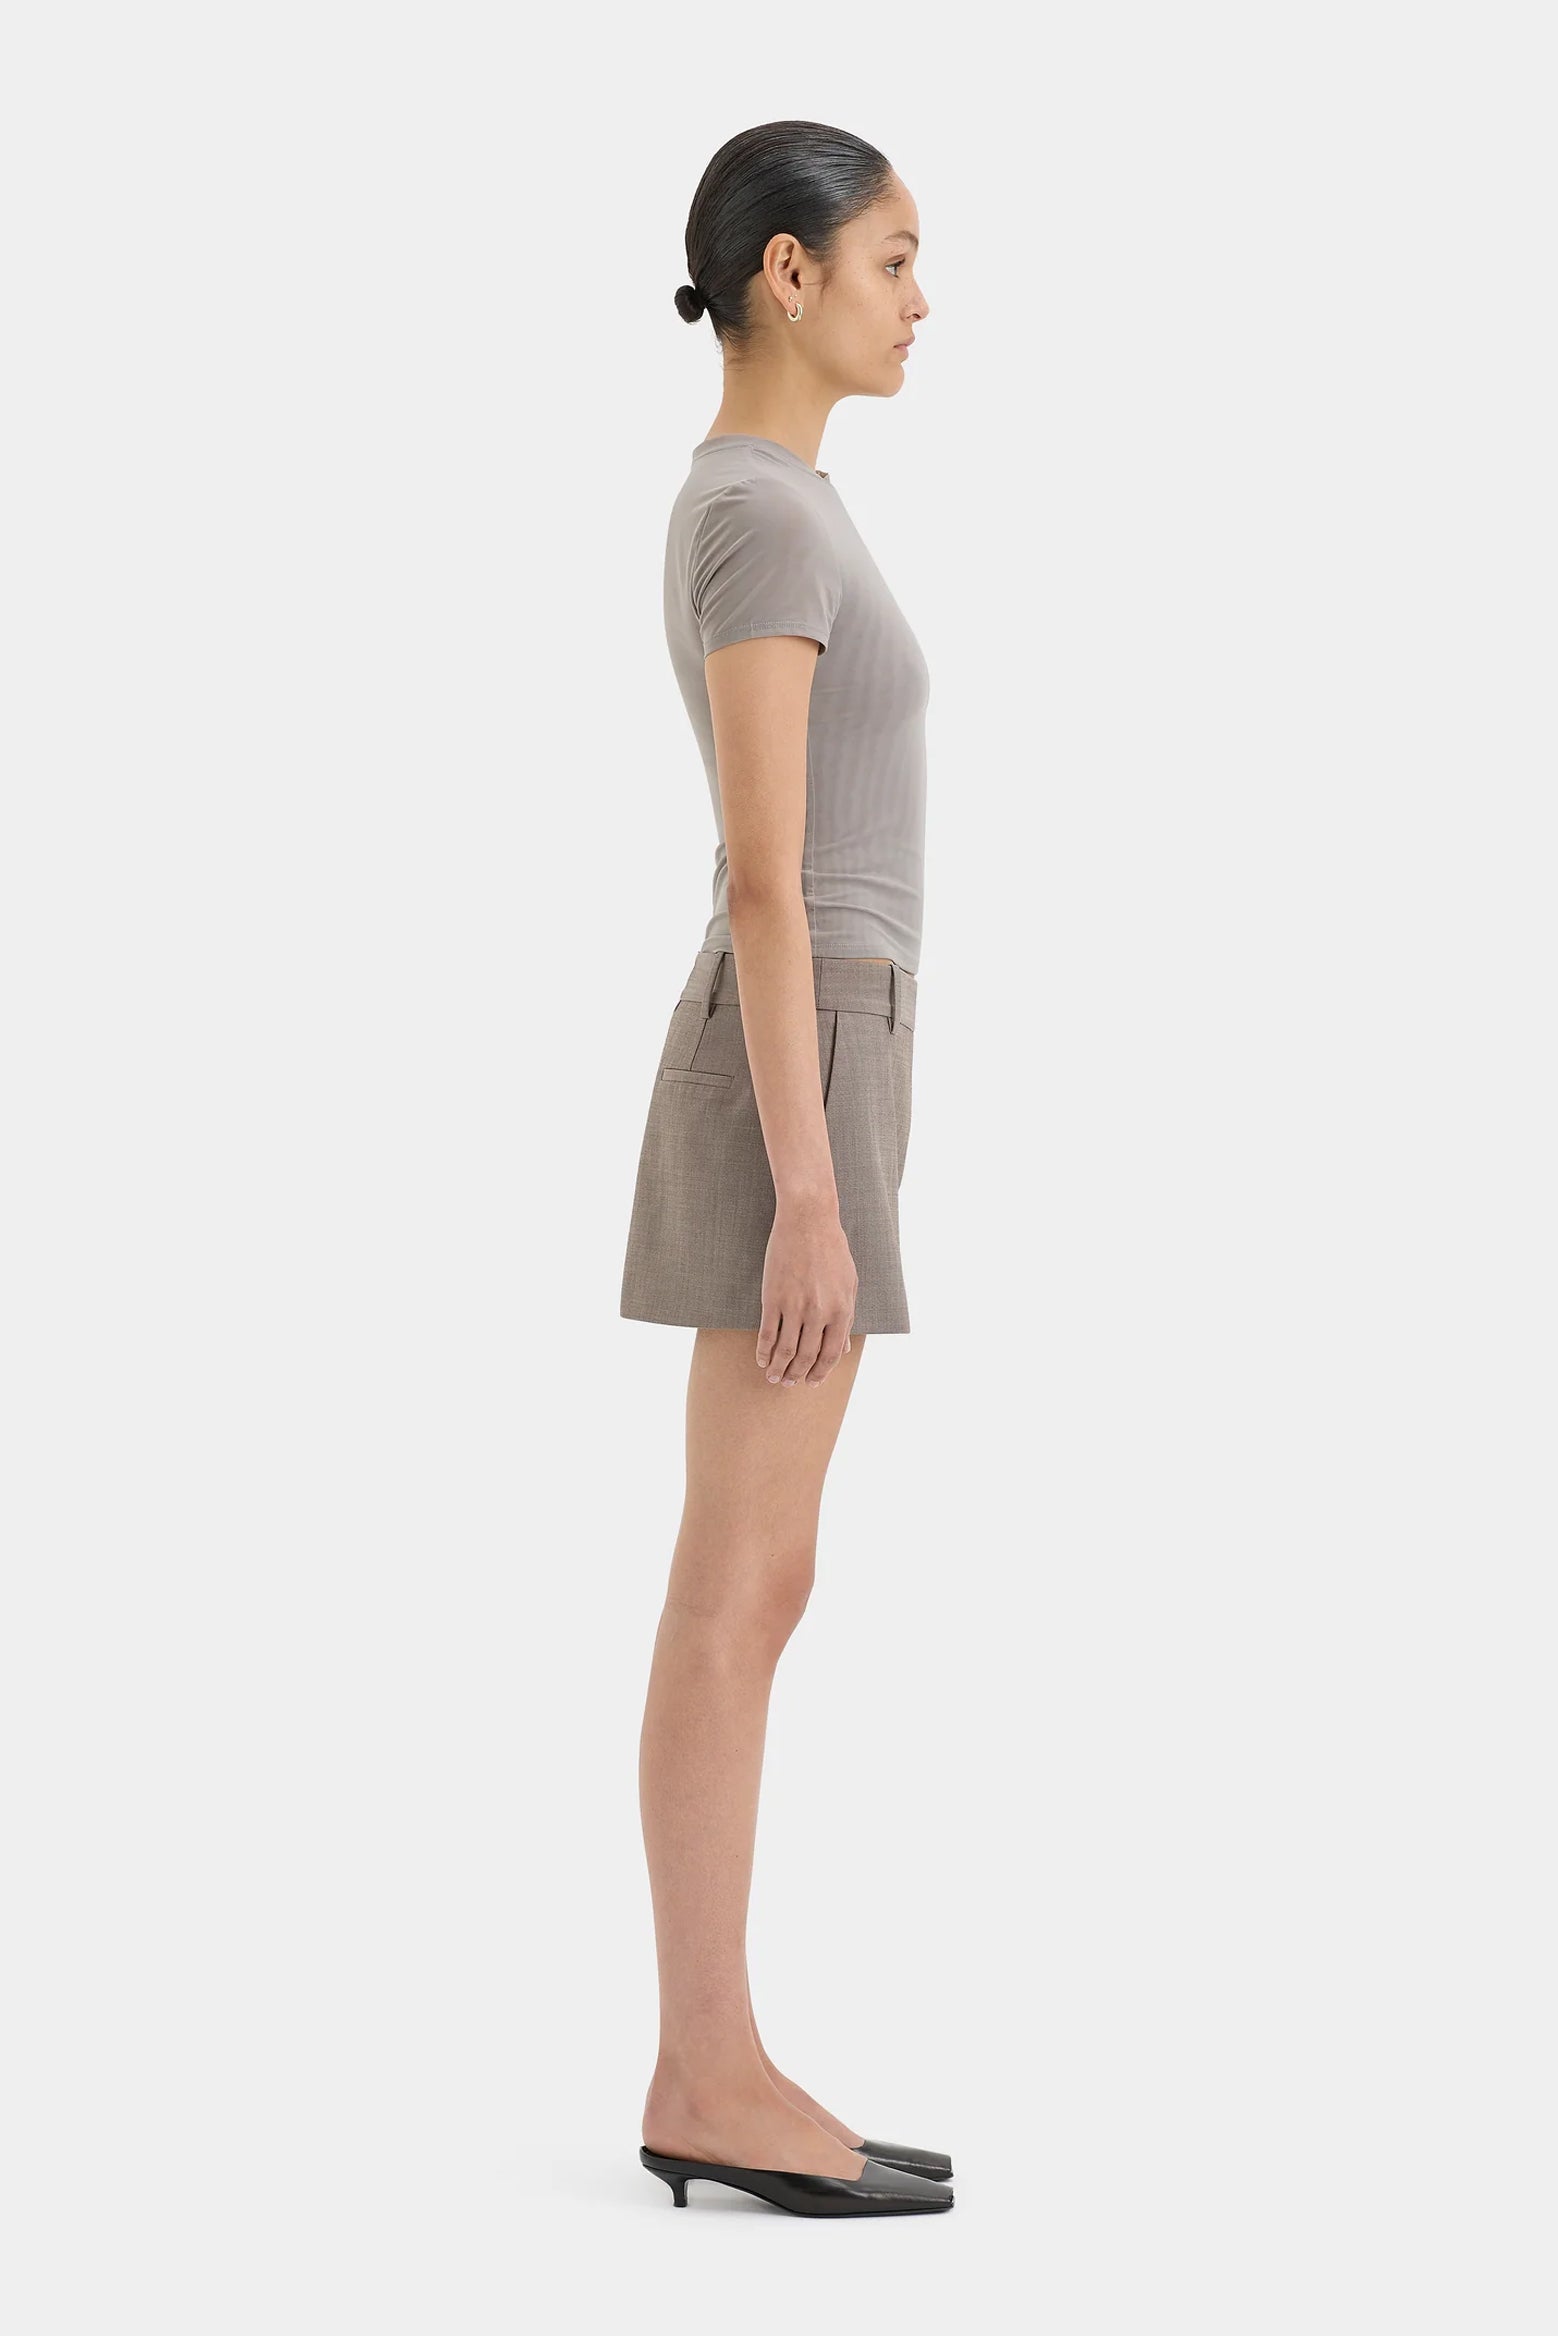 SIR Leonardo Belted Mini Skirt in Taupe available at The New Trend Australia.